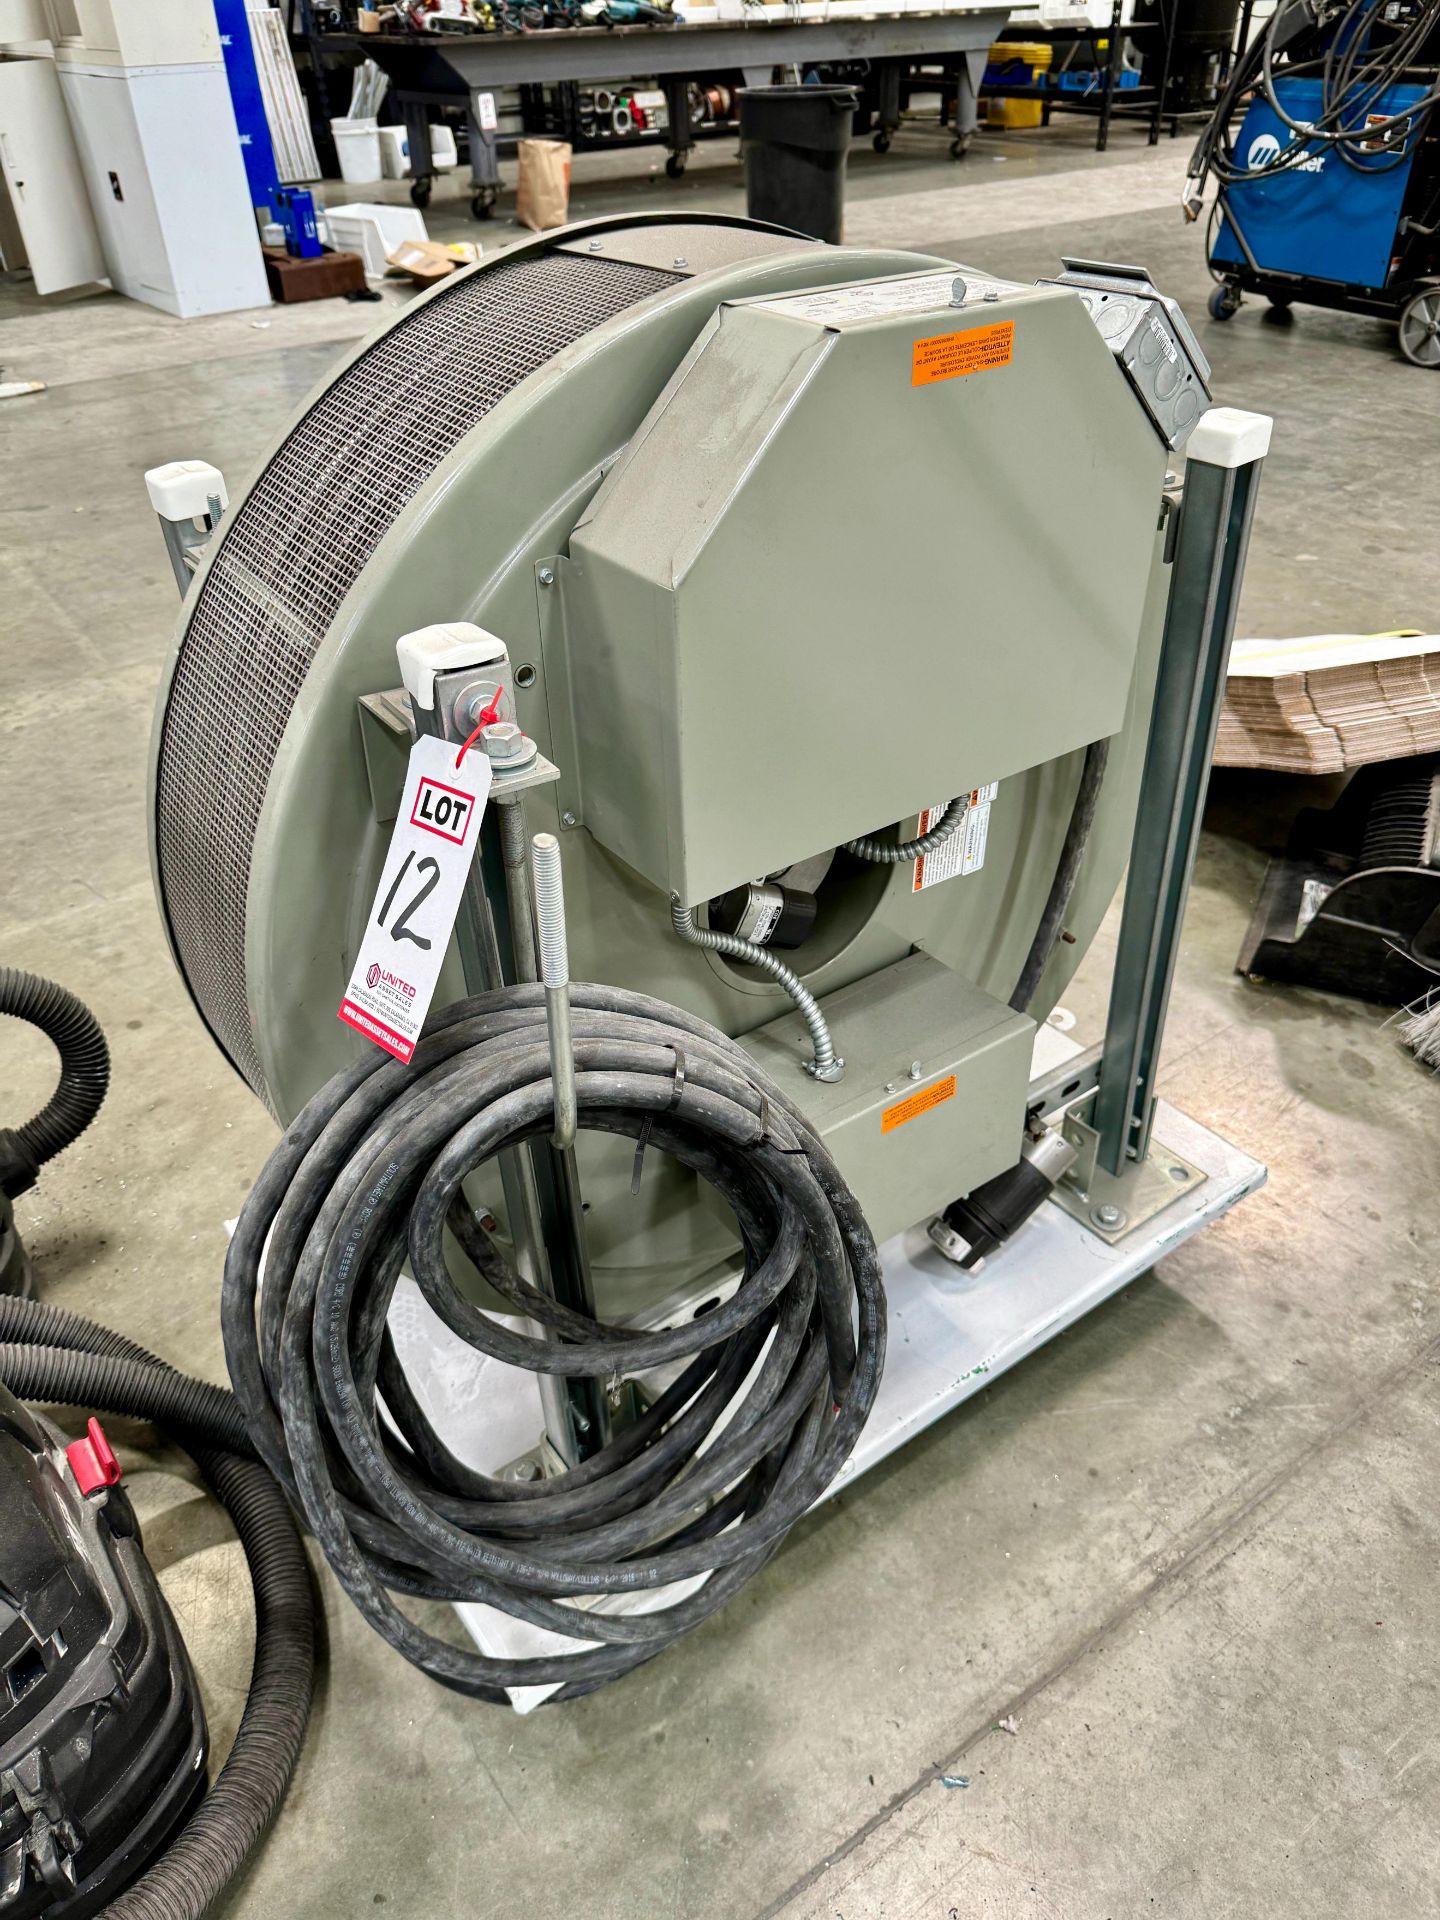 MODINE ELECTRICAL HEATER, MODEL PTE500C 3301, 171,000 BTUH, PORTABLE, S/N 1501CB0520-5127 - Image 3 of 4